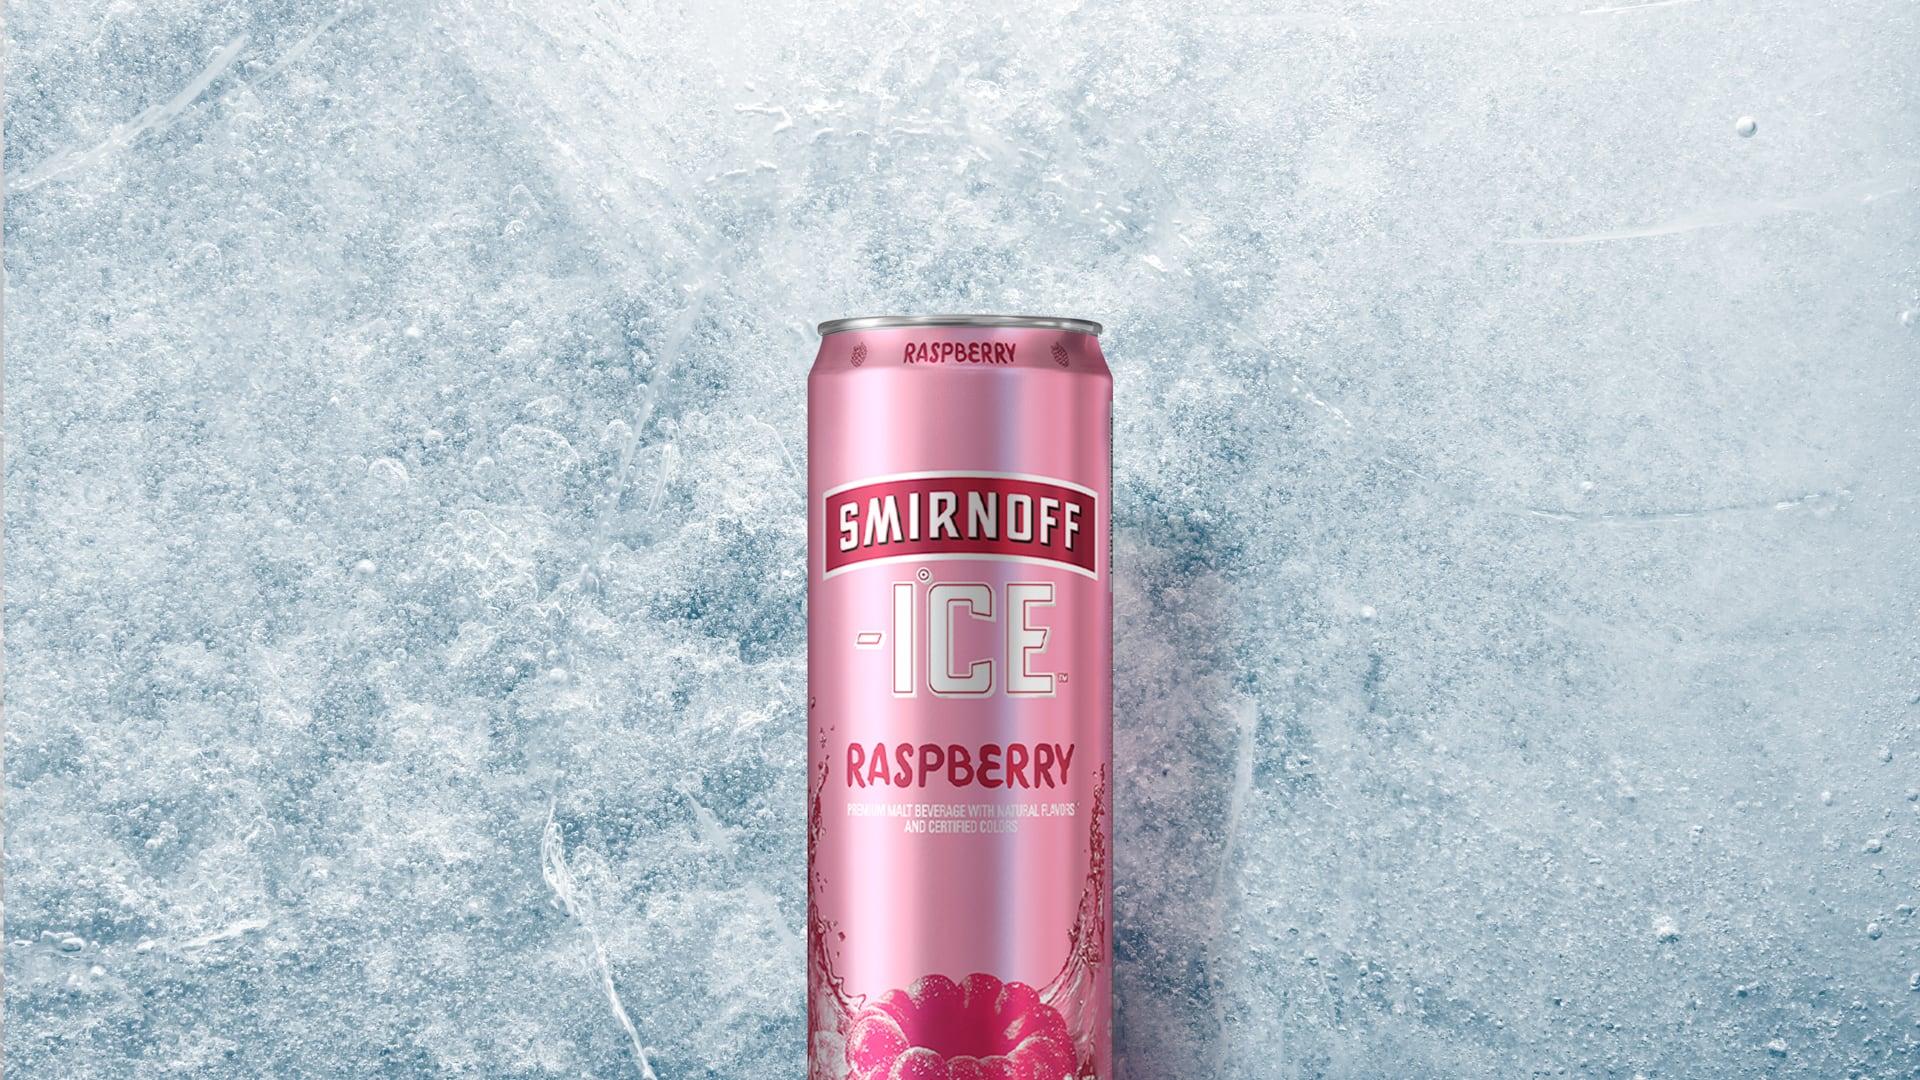 Smirnoff Ice Raspberry Can on a Icy background